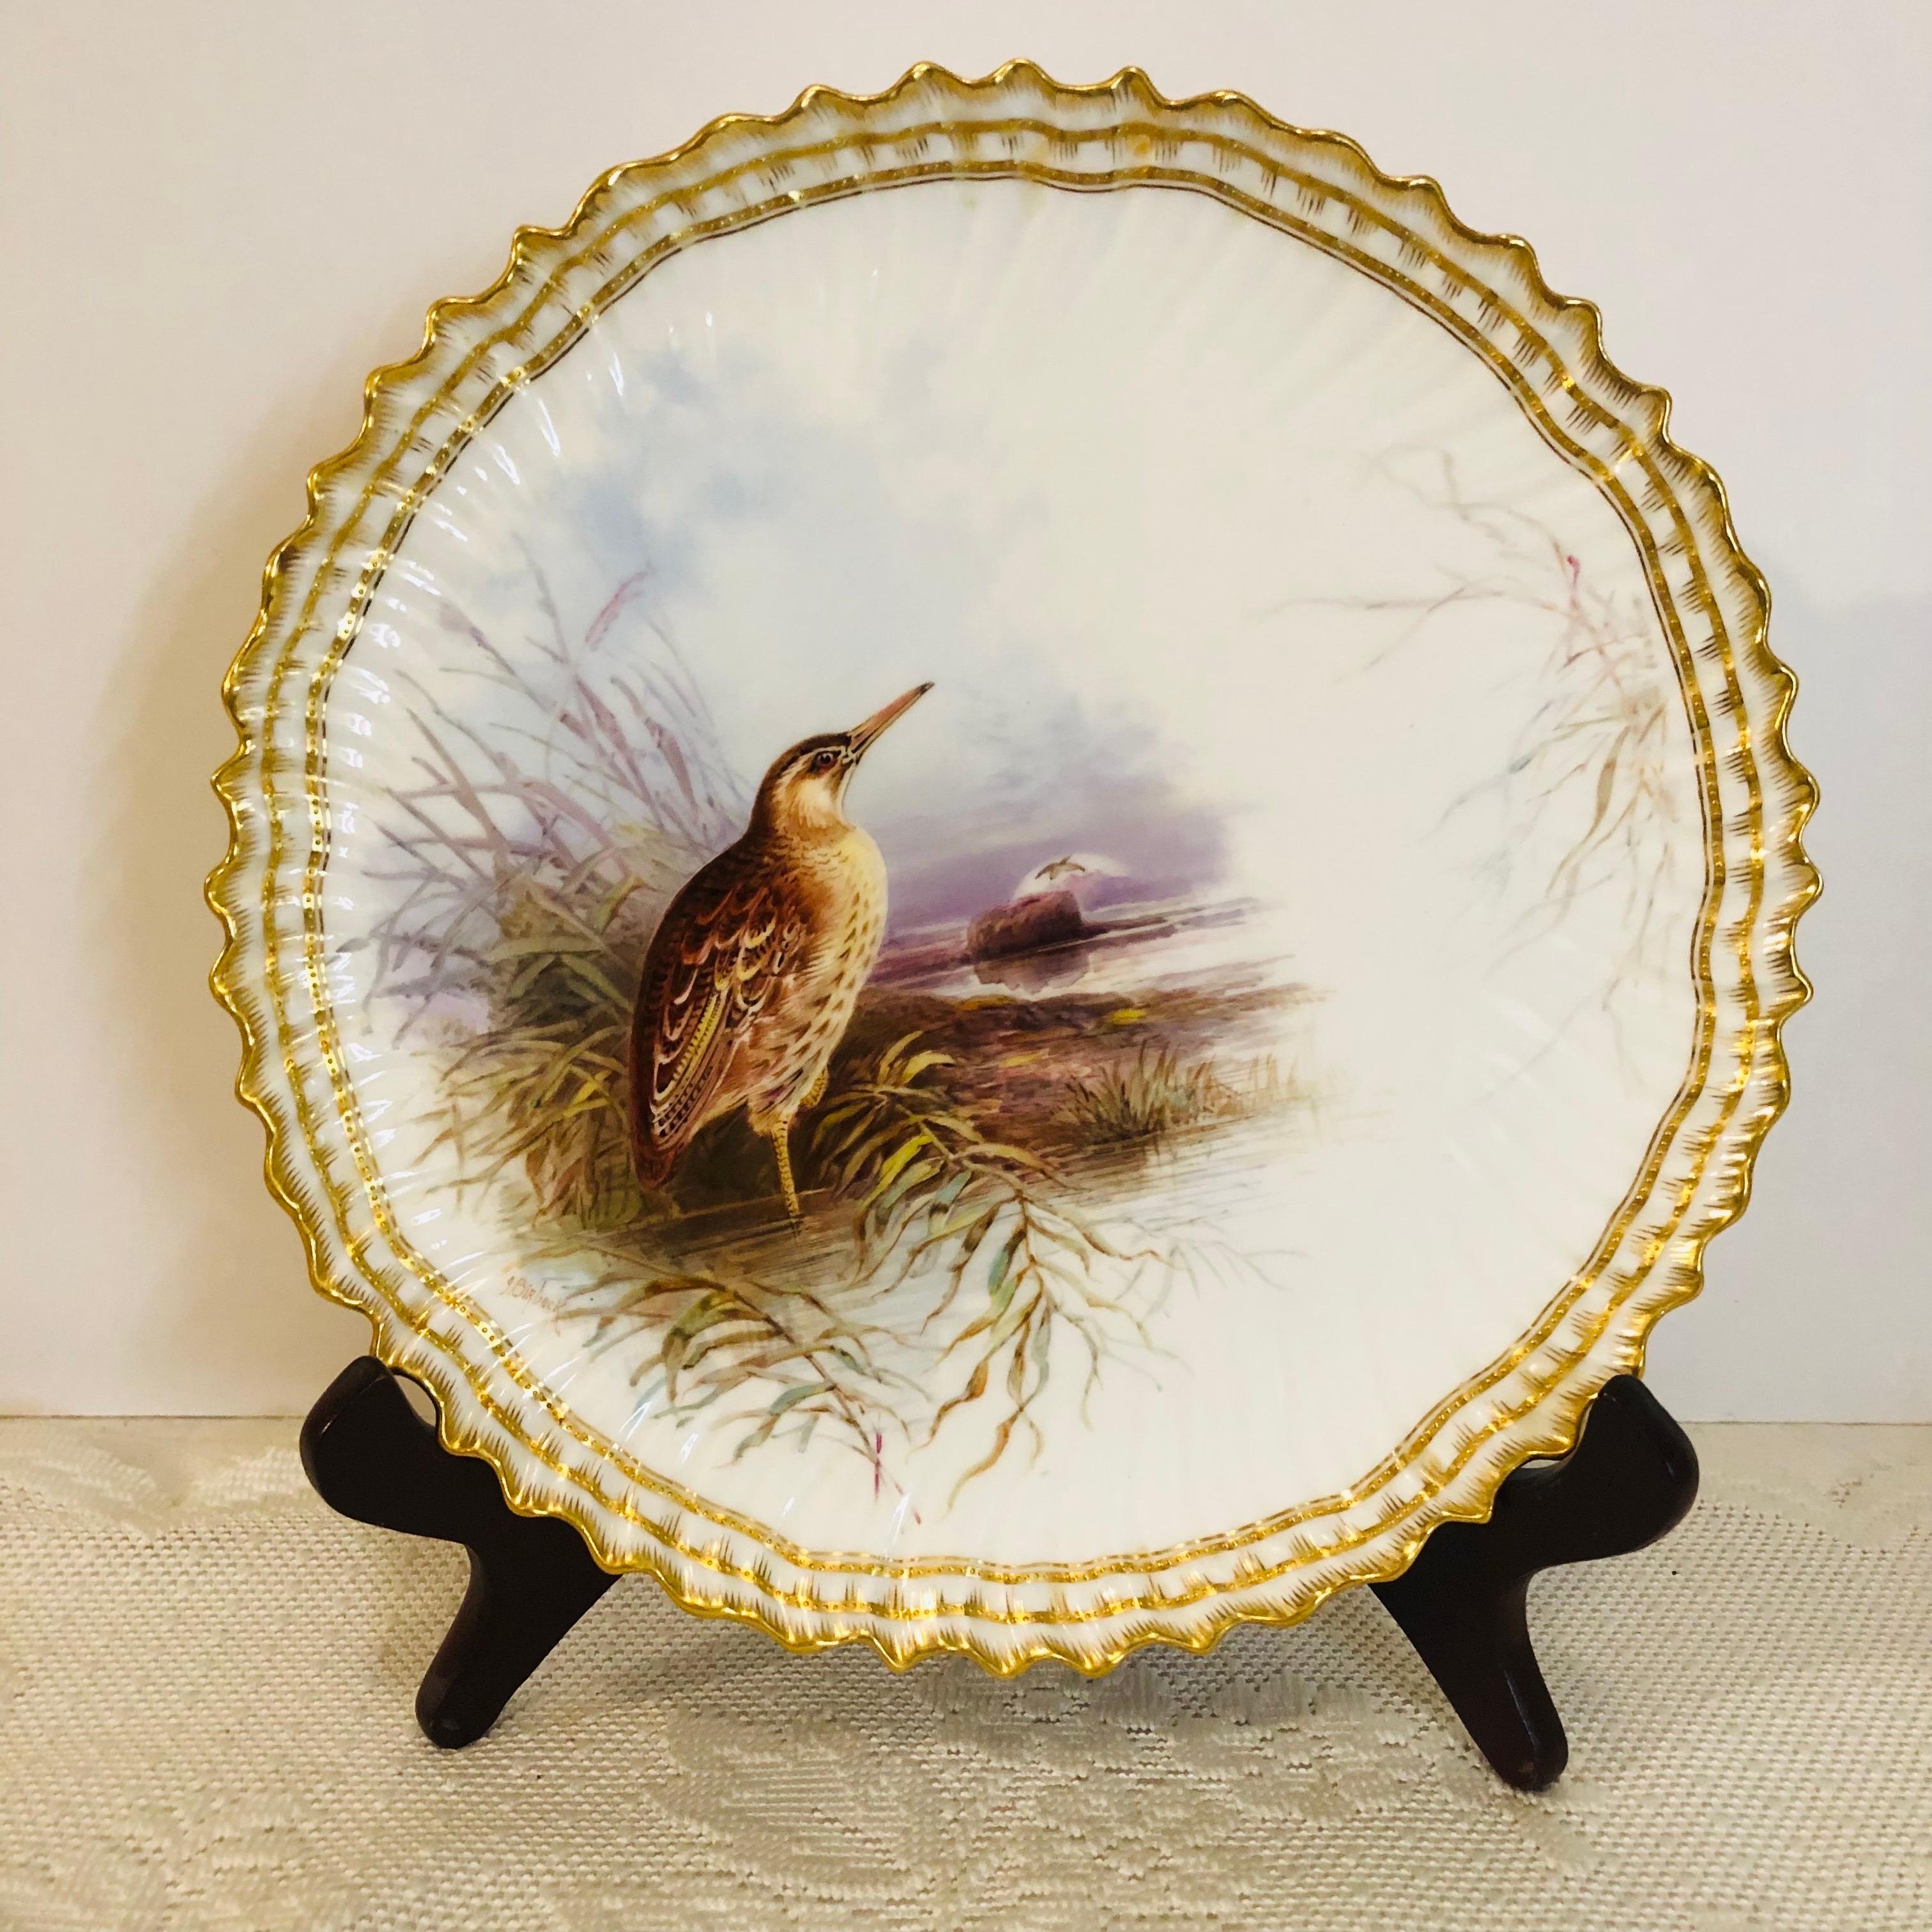 Set of 11 Cauldon Plates Each Painted Exquisitely With a Different Bird  7